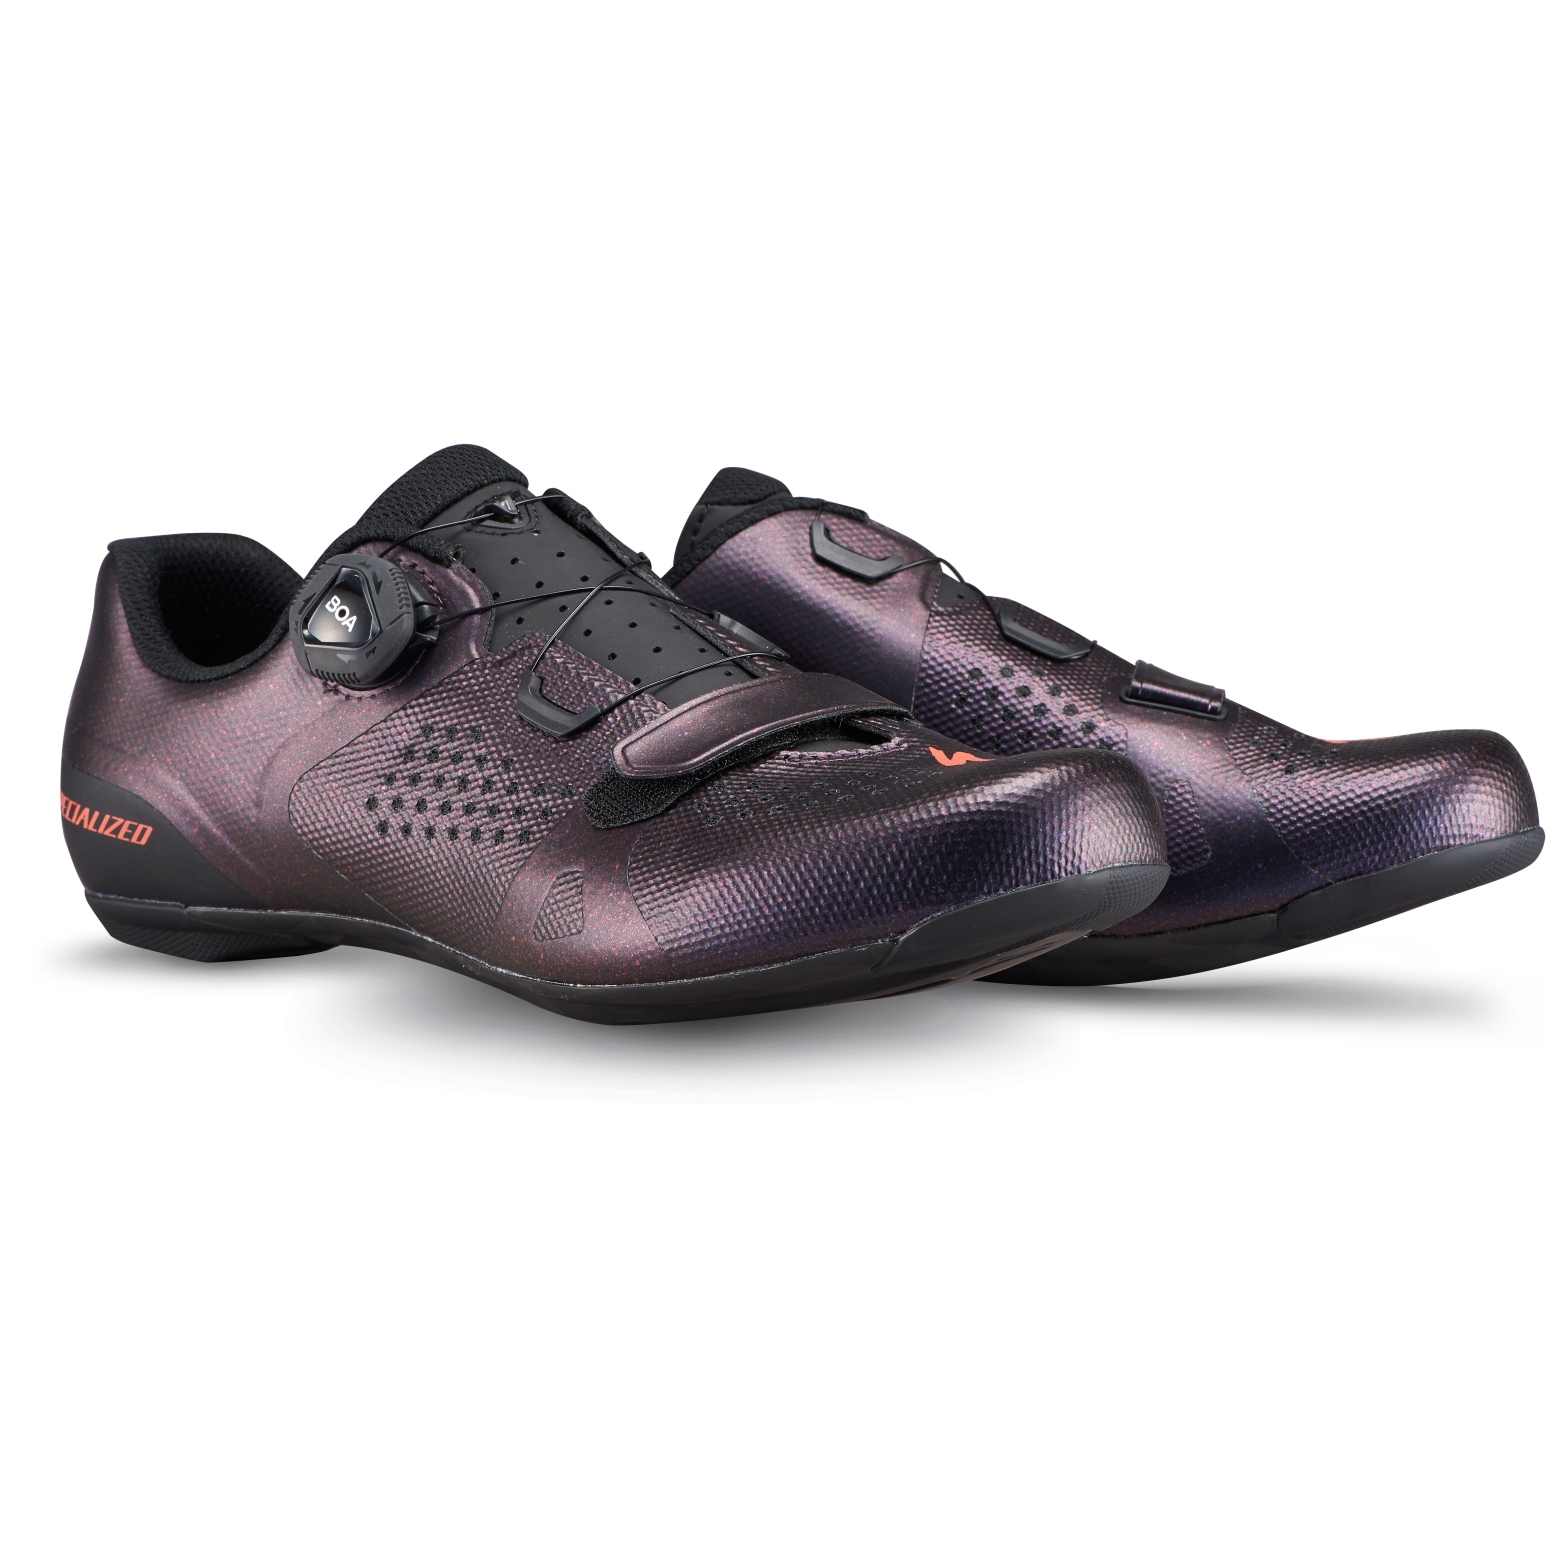 Specialized Torch 2.0 Road Shoe - Black/Starry